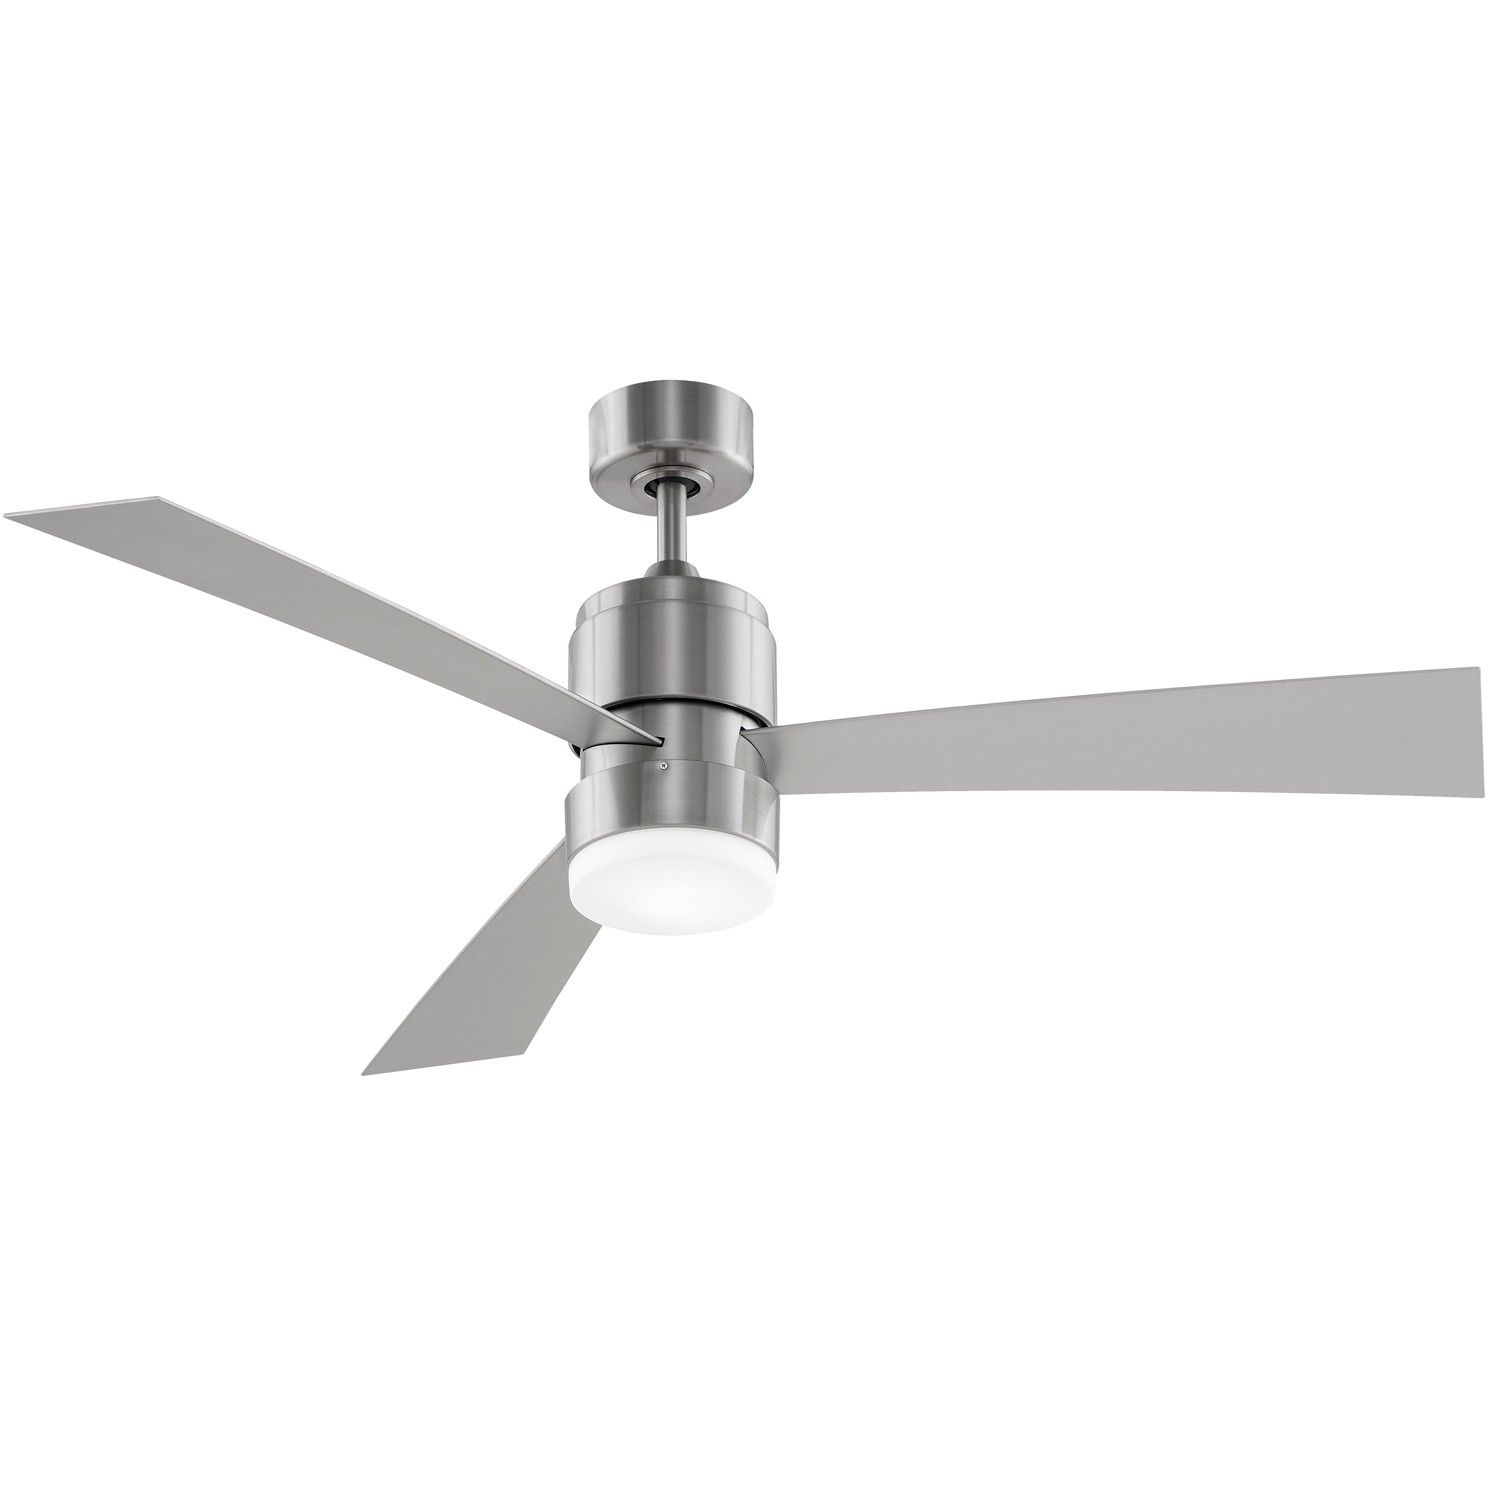 2018 Ebay Ceiling Fans (33 Photos) | Bathgroundspath In Outdoor Ceiling Fans With Lights At Ebay (Photo 3 of 15)